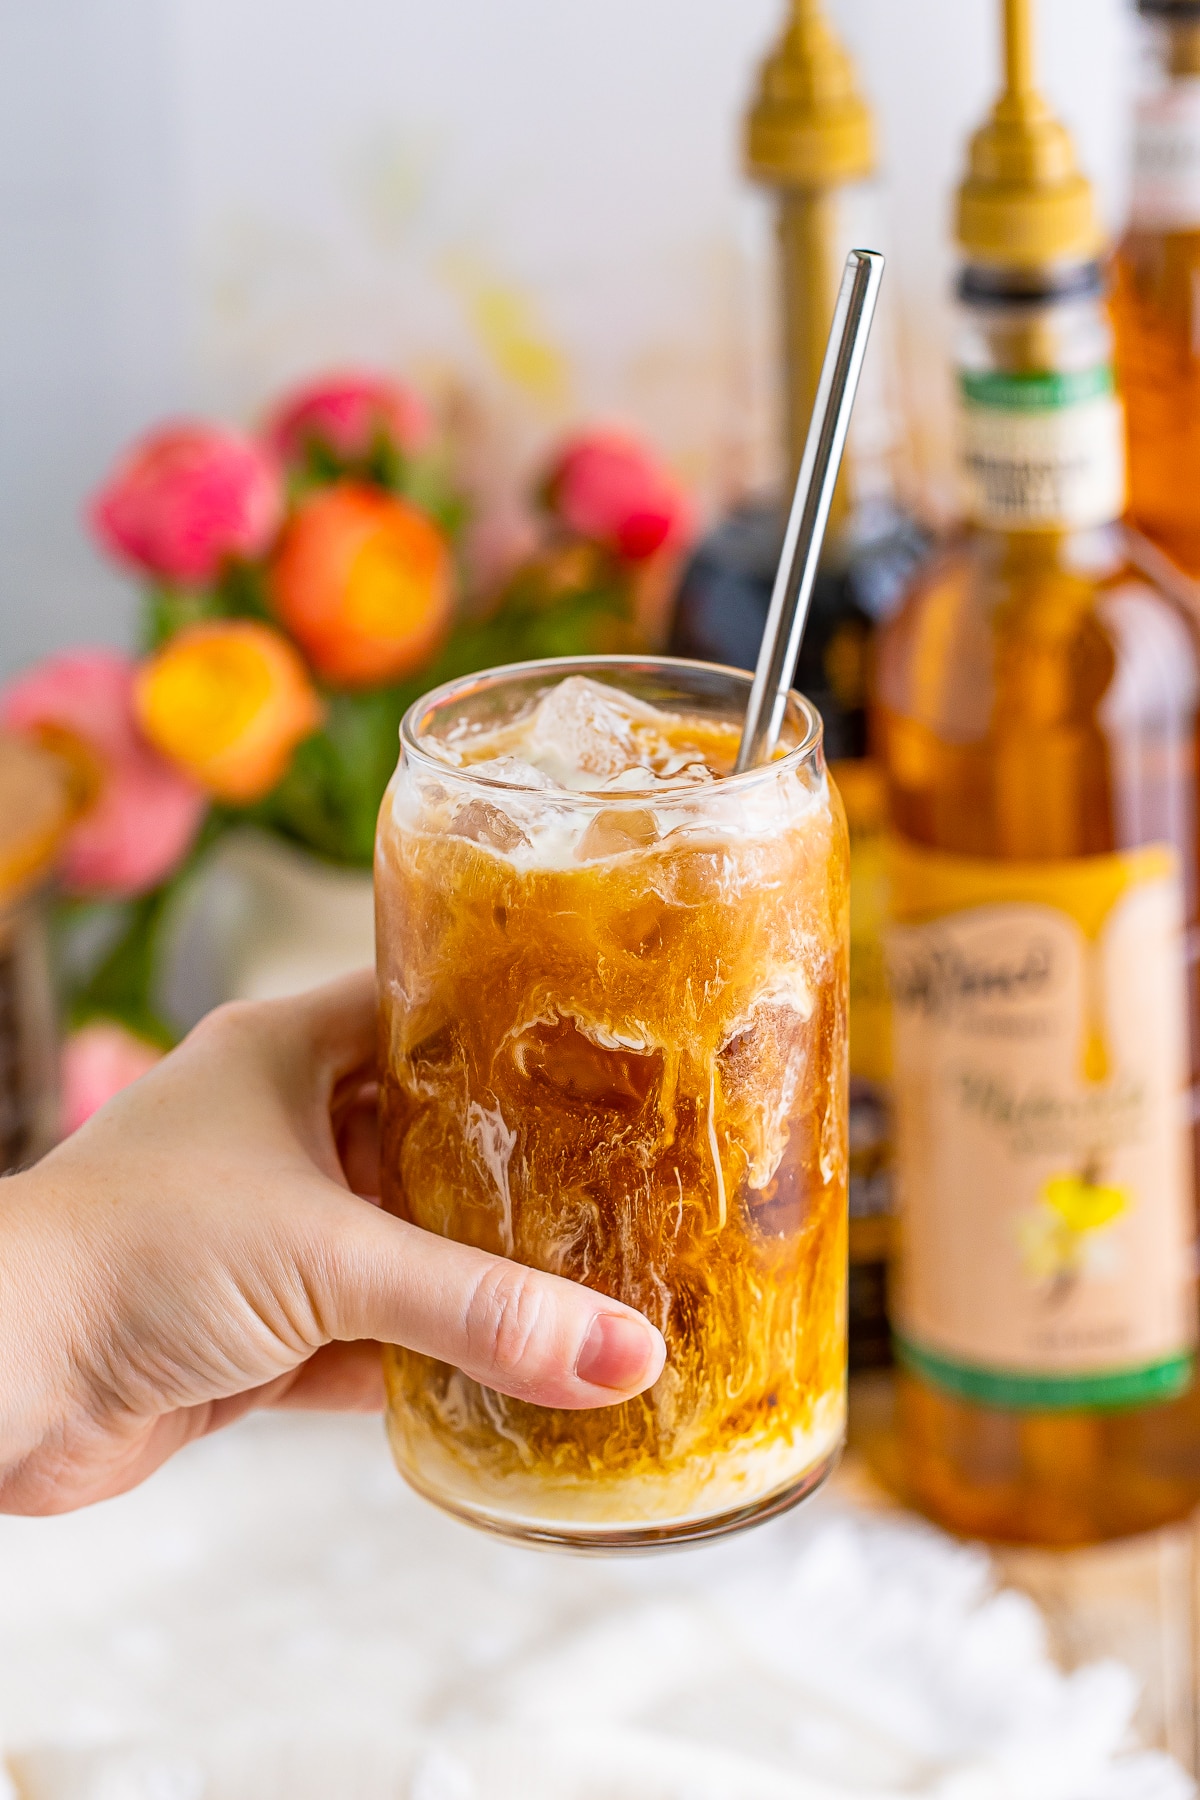 a hand holding an iced coffee in a glass with cream and a metal straw, coffee syrups in the background and flowers